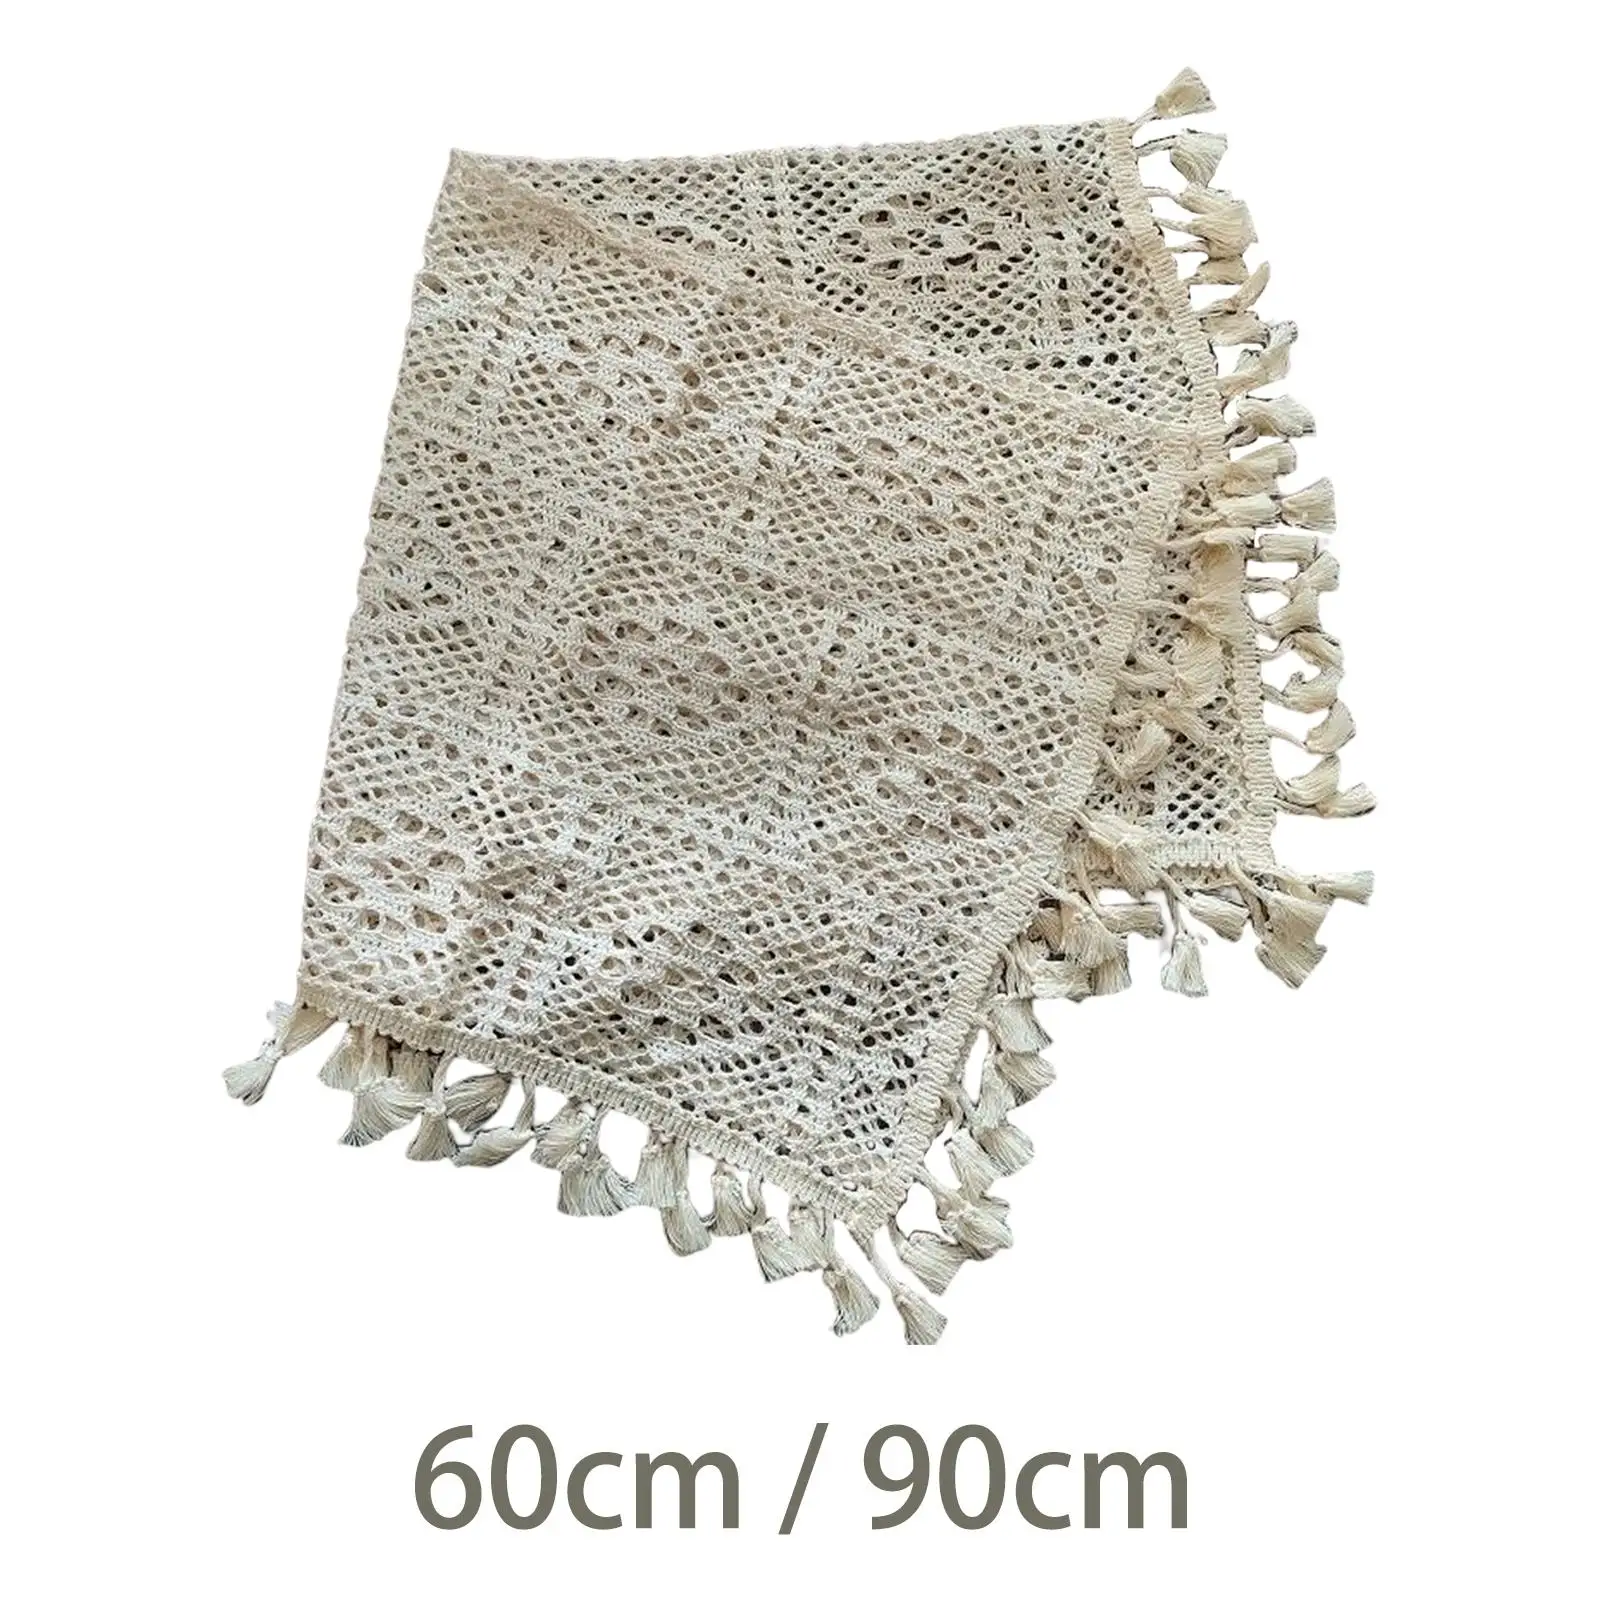 Hollow Weaving Photo Prop Blanket Photo Shooting Accessories Cotton Thread Photography Wrapping Towel Decorative Tassel Blanket